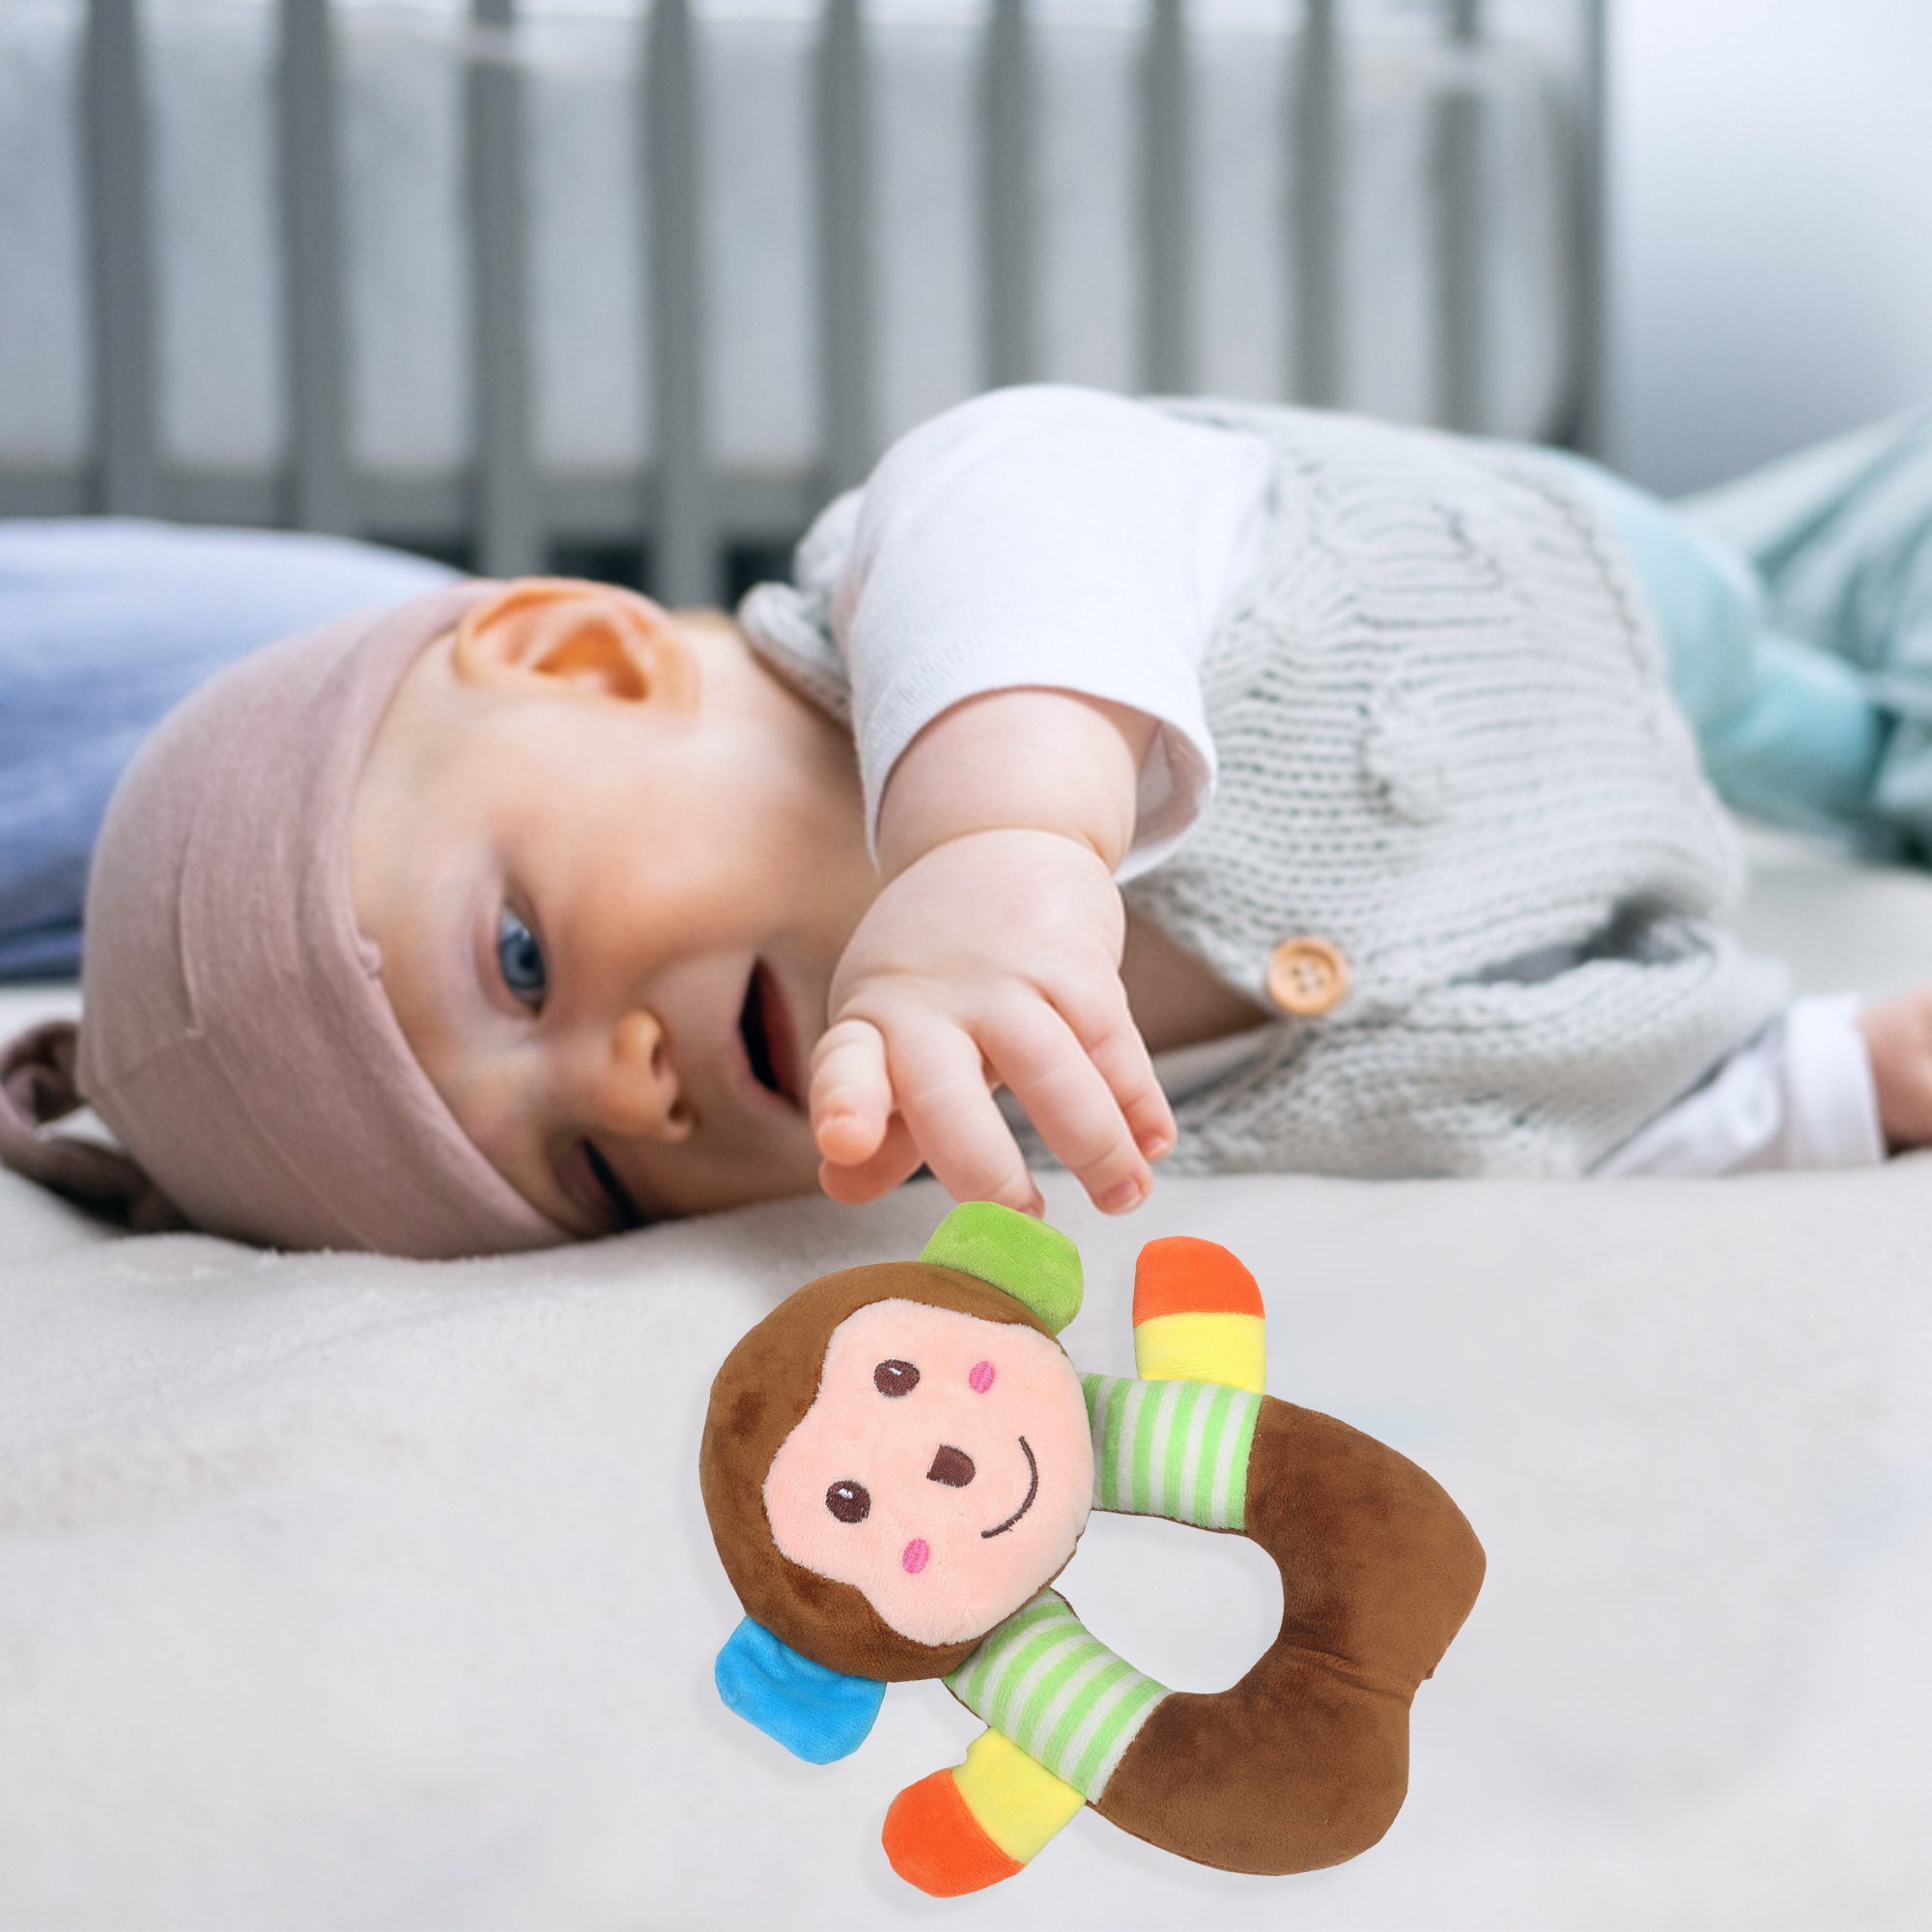 Funky Monkey Soft Bown Rattle To Give Your Baby Company